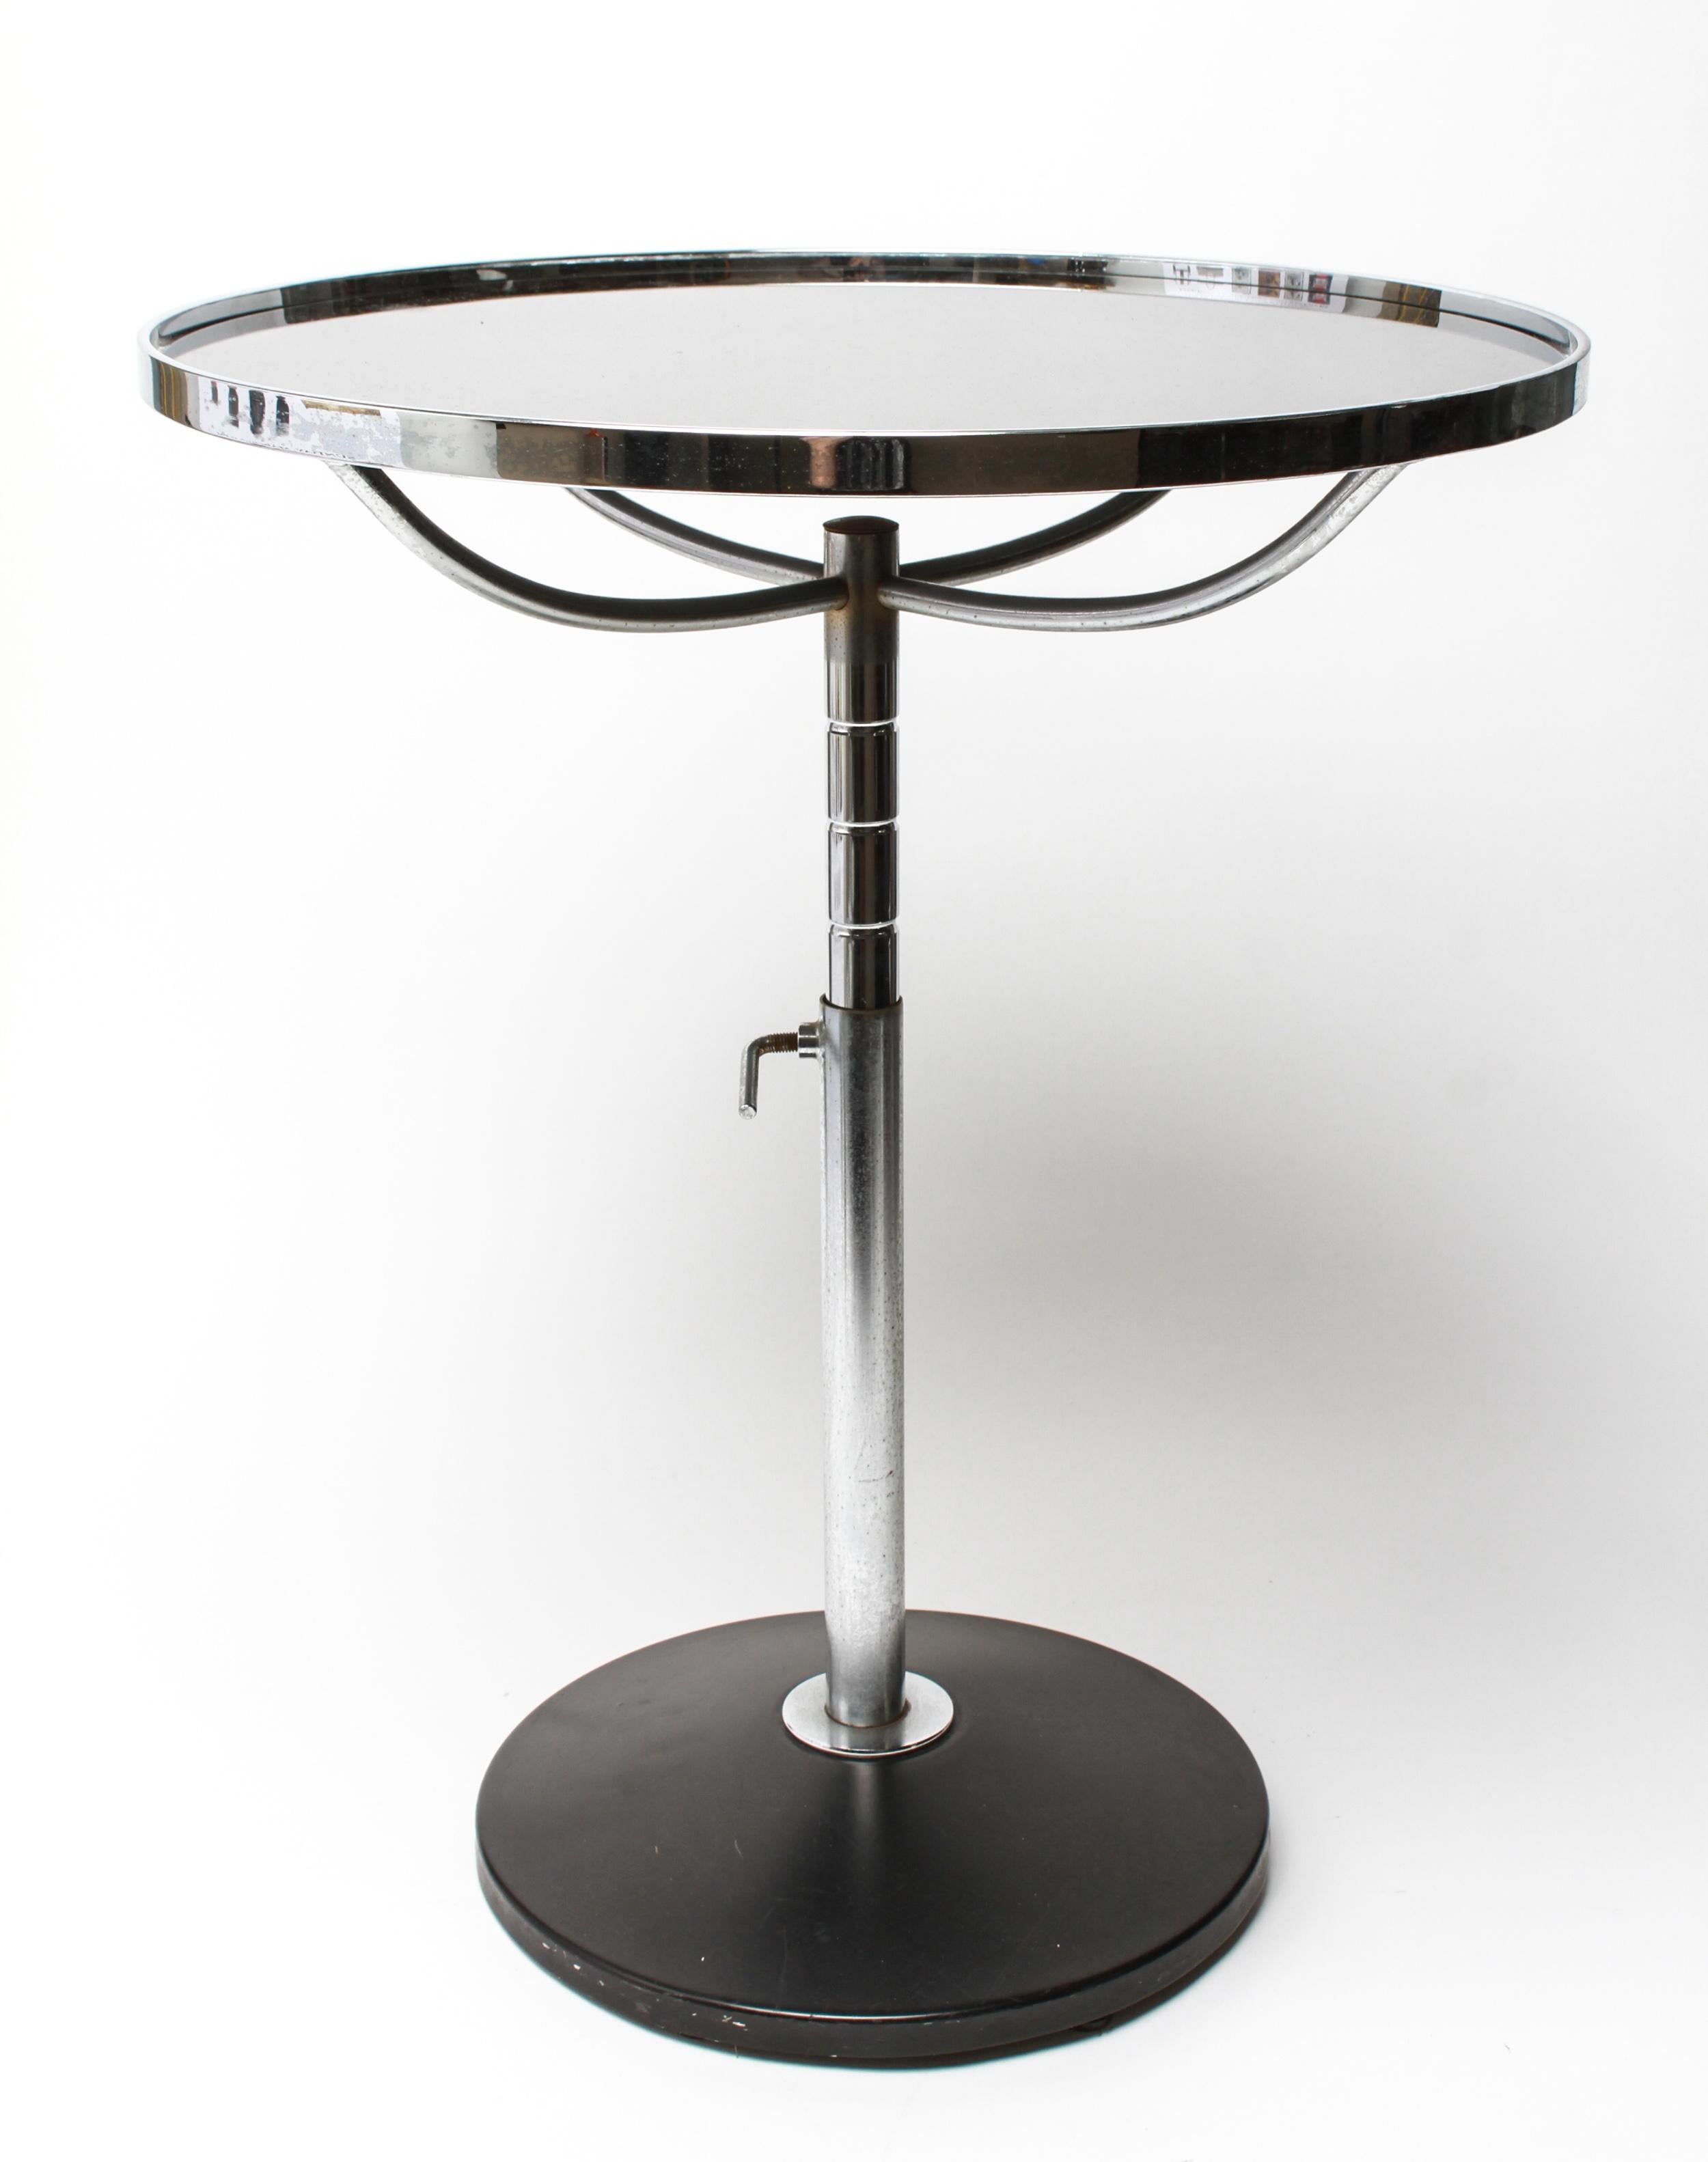 Modern metal adjustable height round top side table with an inset with a black glass top and a chrome metal frame. The piece is in great vintage condition with age-appropriate wear.